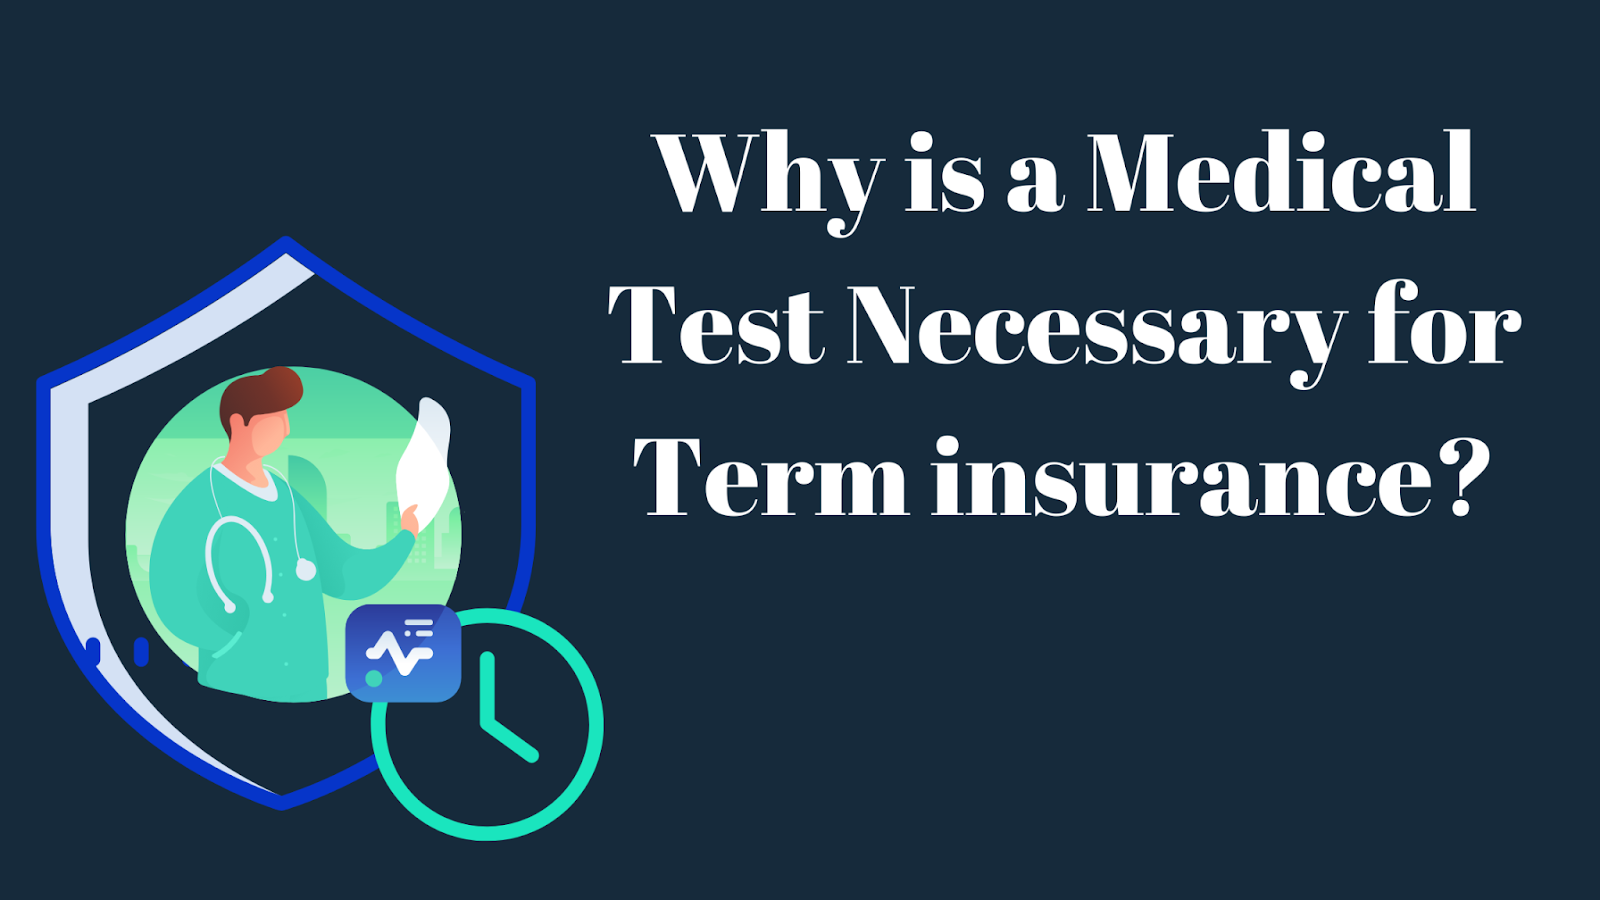 Why is a Medical Test Necessary for Term insurance?